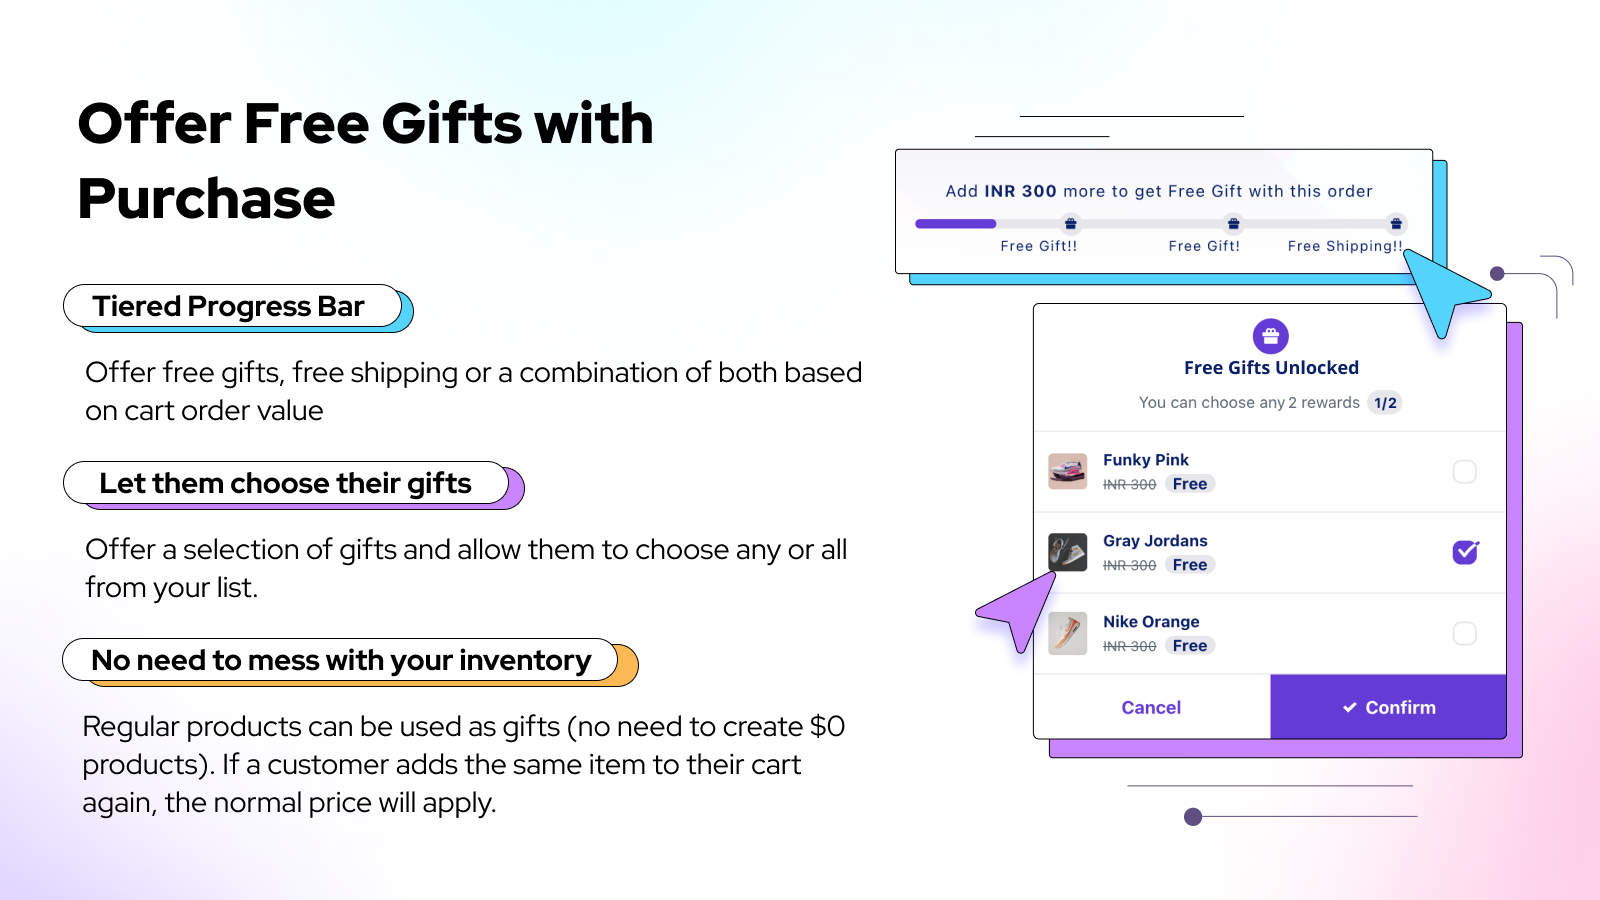 Cart goals to give Free Gifts to select target audience